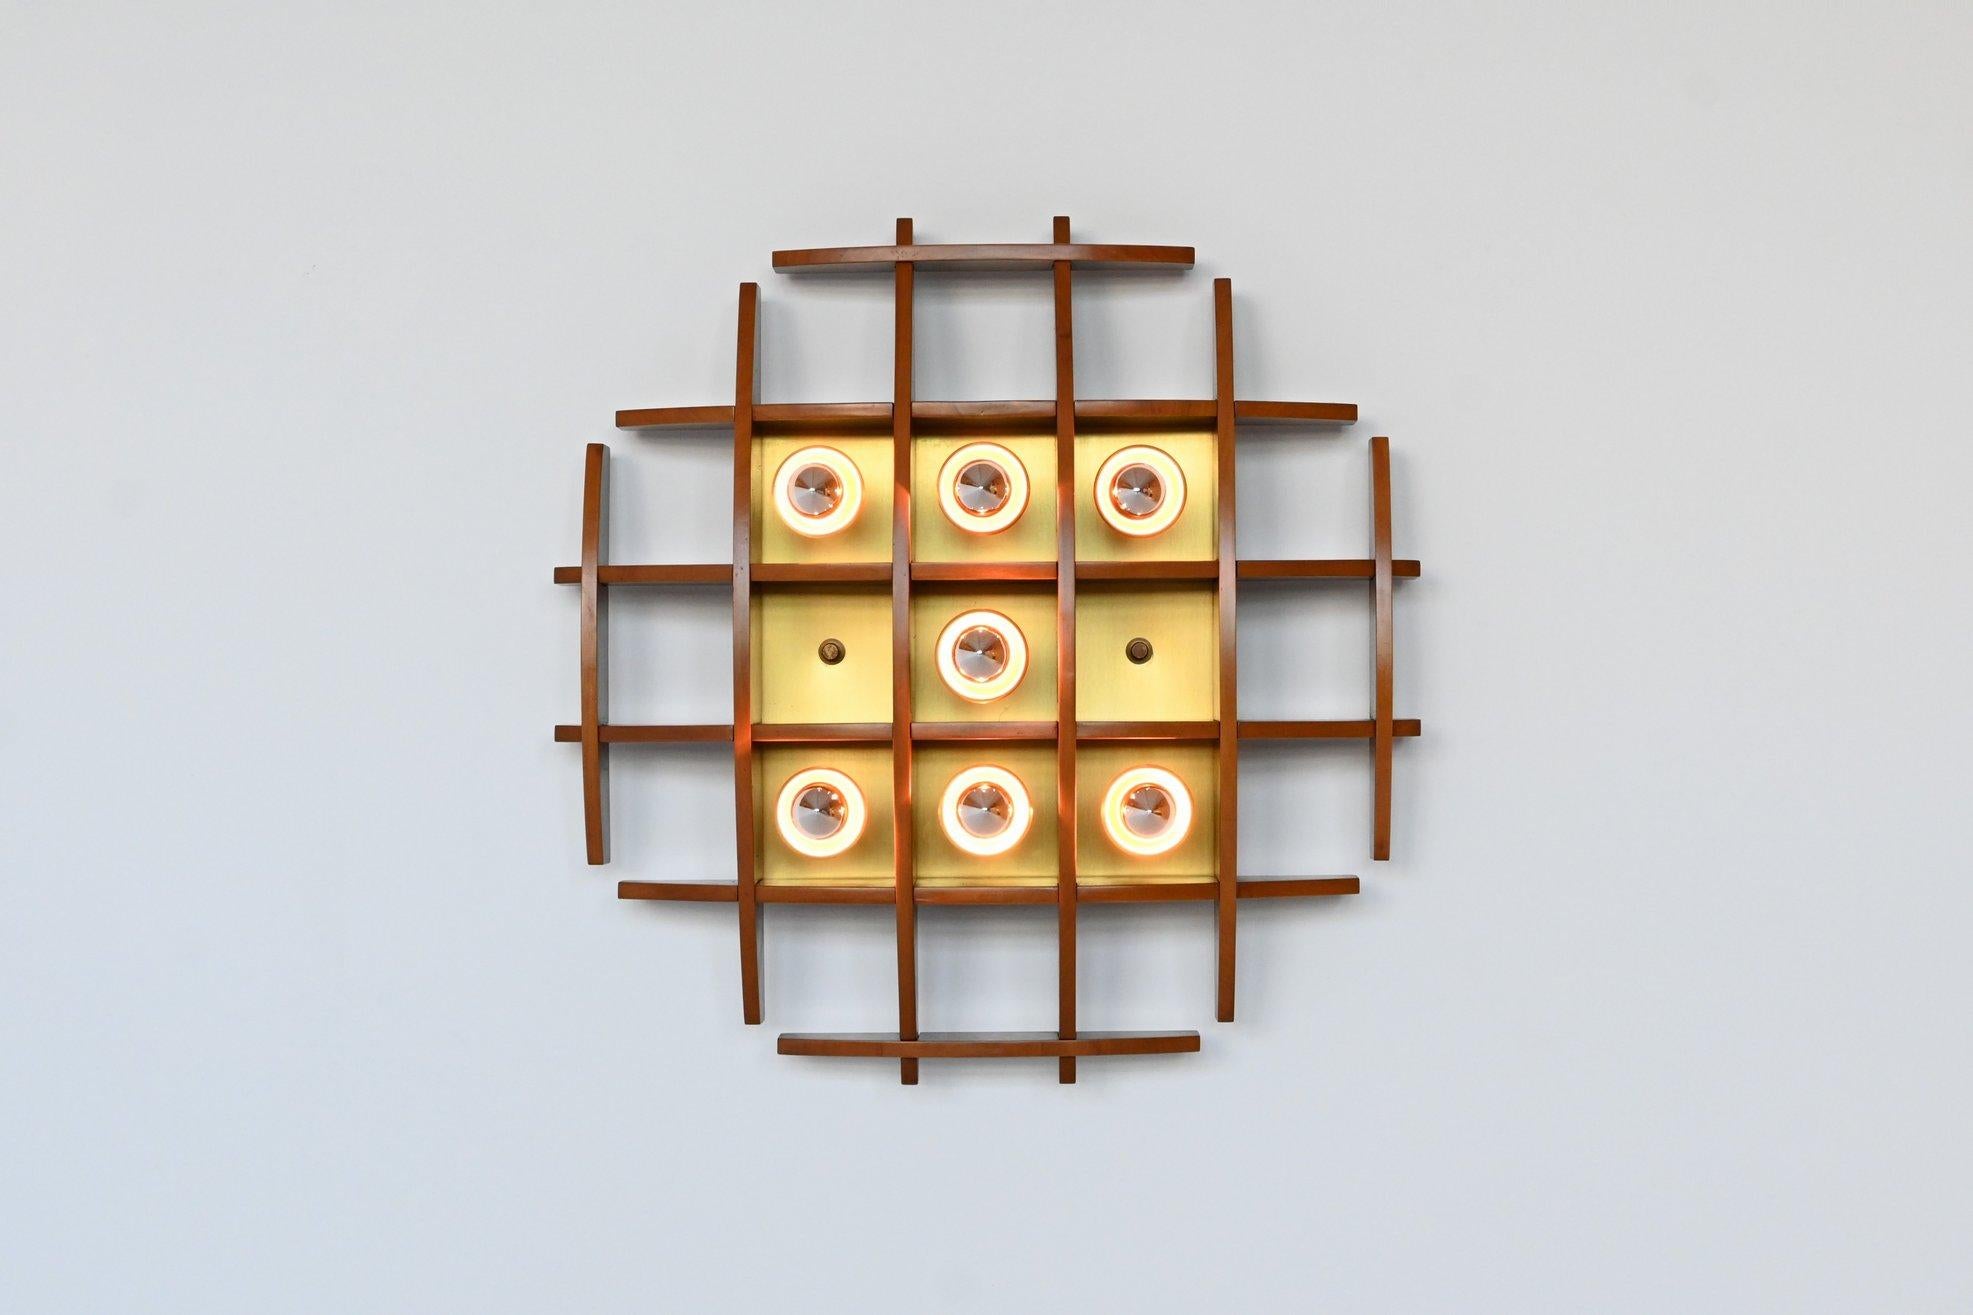 Impressive wall or ceiling lamp manufactured by Esperia, Italy 1970. This lamp is made of teak wood and has brass details like the fittings and wall plate. It can be used as wall or ceiling lamp. Beautiful geometric lamp in very good condition and